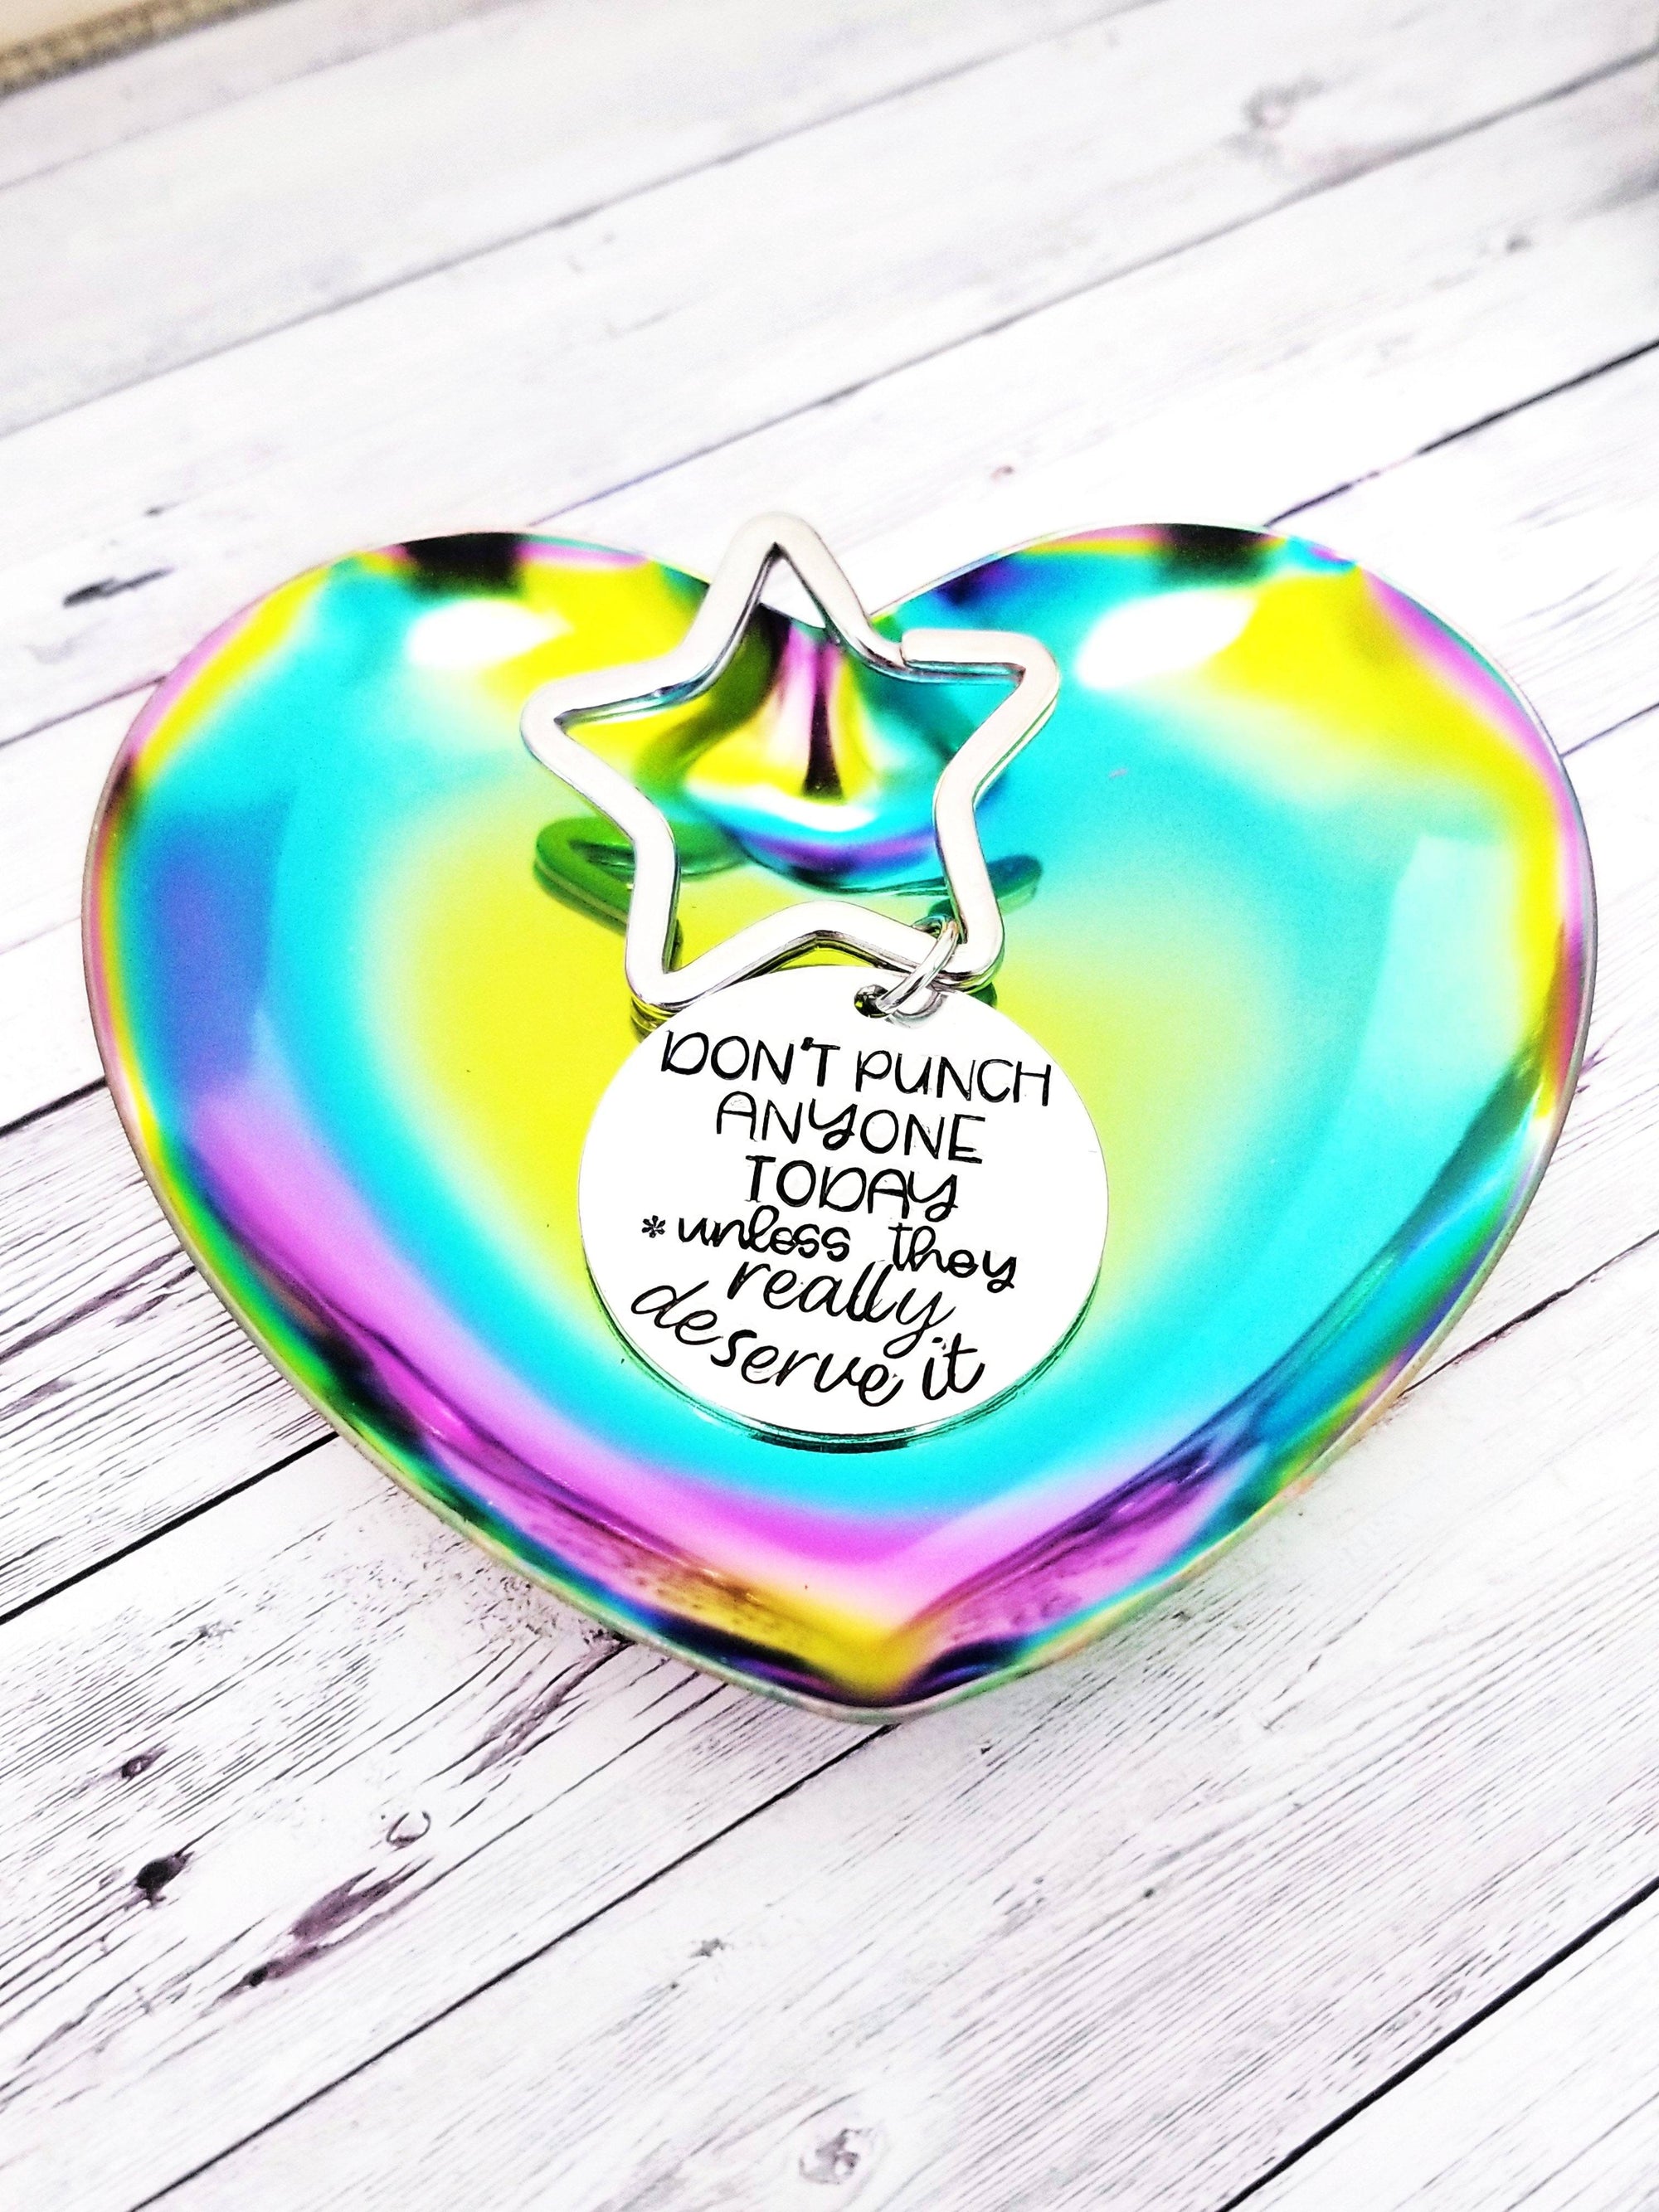 Don't Punch Anyone, Customer Service Gift, Backpack Tag, Funny Mantra Gift